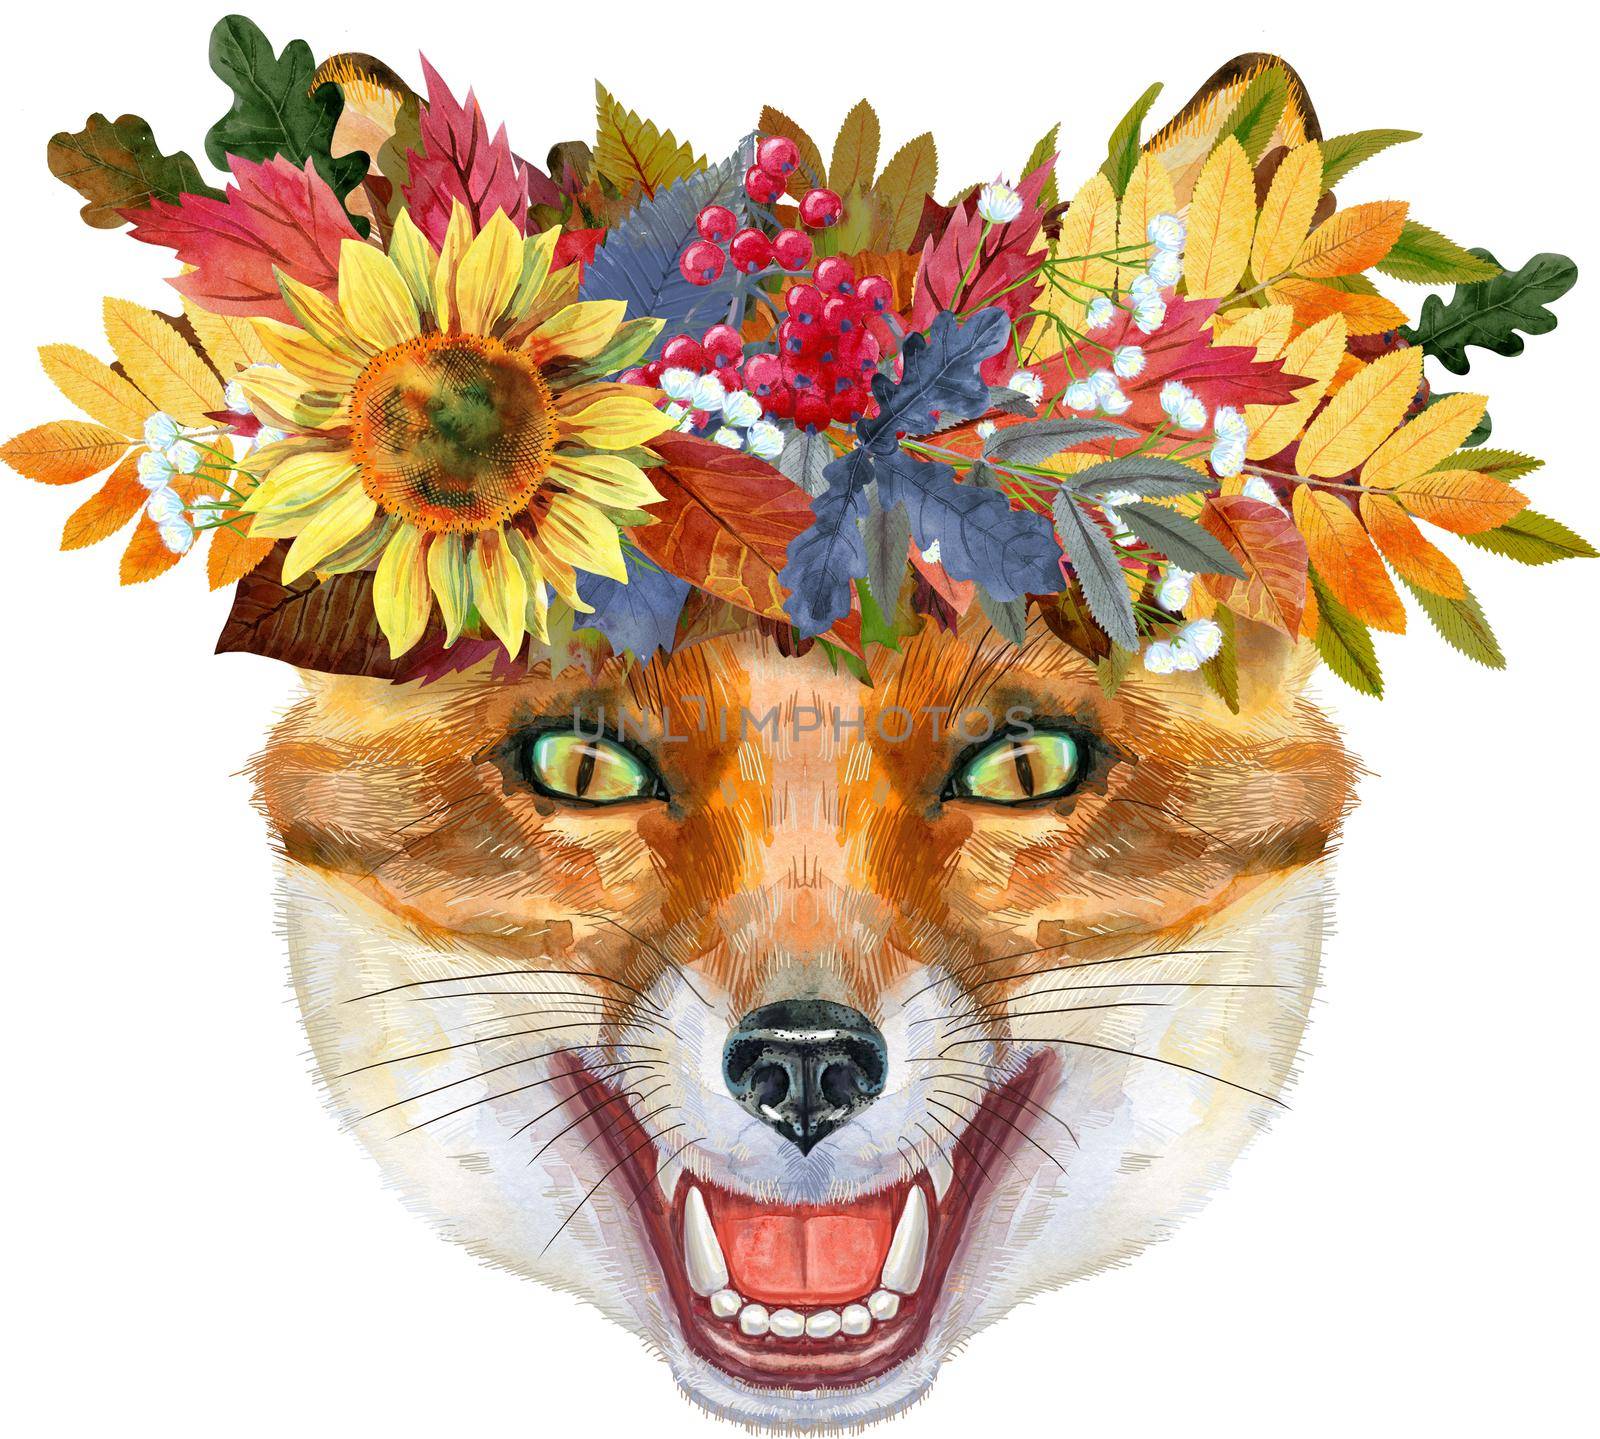 Fox head in a wreath of autumn leaves. Watercolor fox painting illustration isolated on white background by NataOmsk